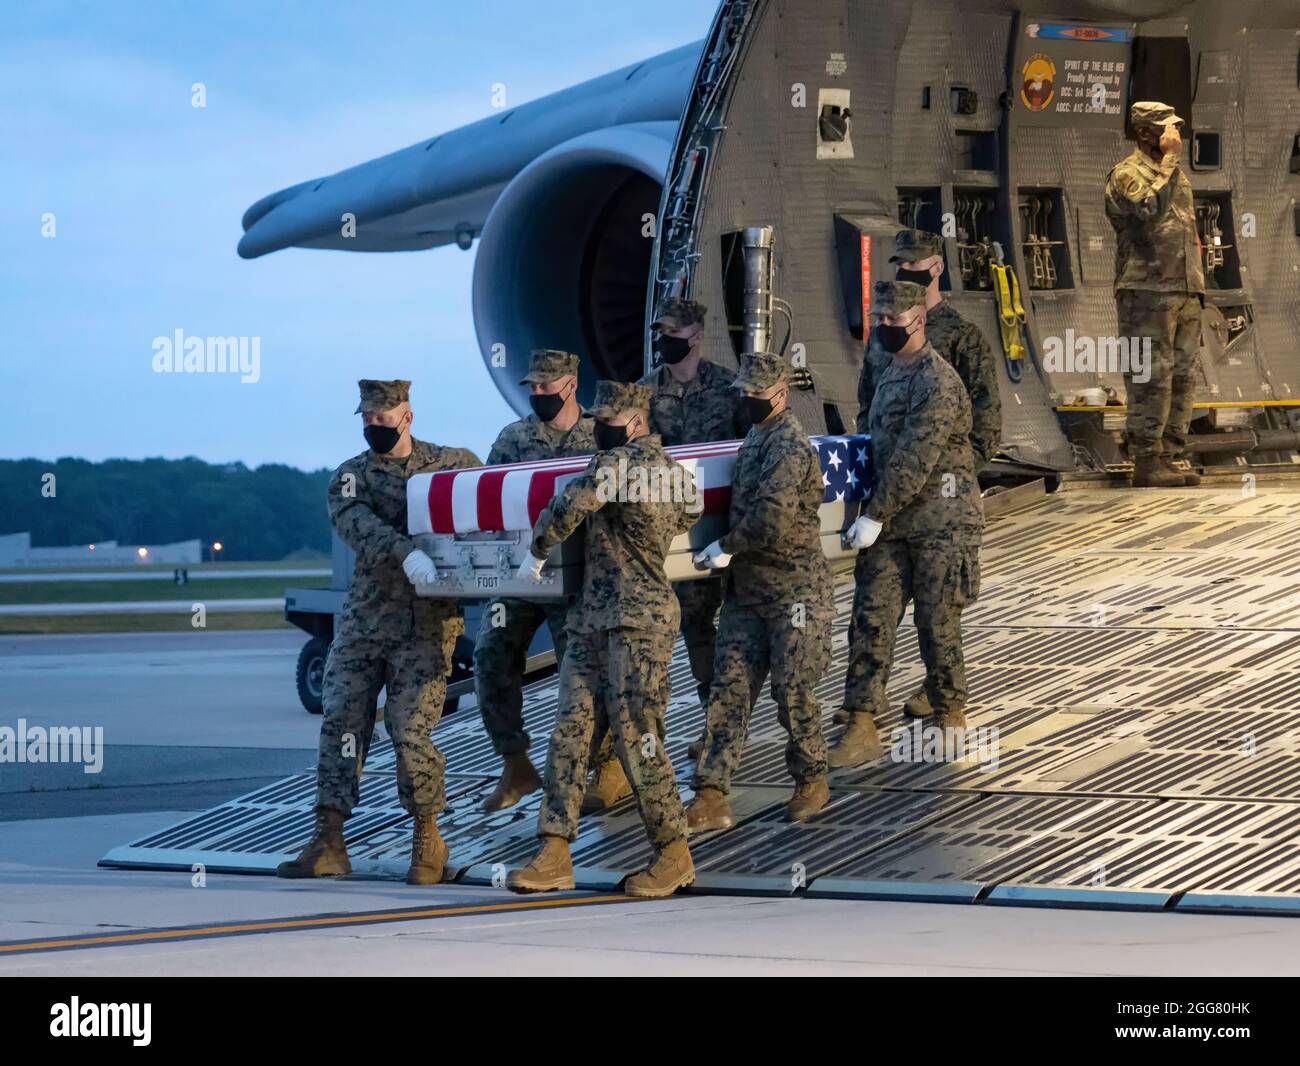 A U.S. Marine Corps carry team transfers the remains of Marine Cpl. Brandon J. Alvarez of Newbury Park, California, June 10, 2021 at Dover Air Force Base, Delaware. Alvarez was assigned to FAST Co., Central Marine Corps Security Force Regiment, Bahrain. (U.S. Air Force photo by Jason Minto) Stock Photo